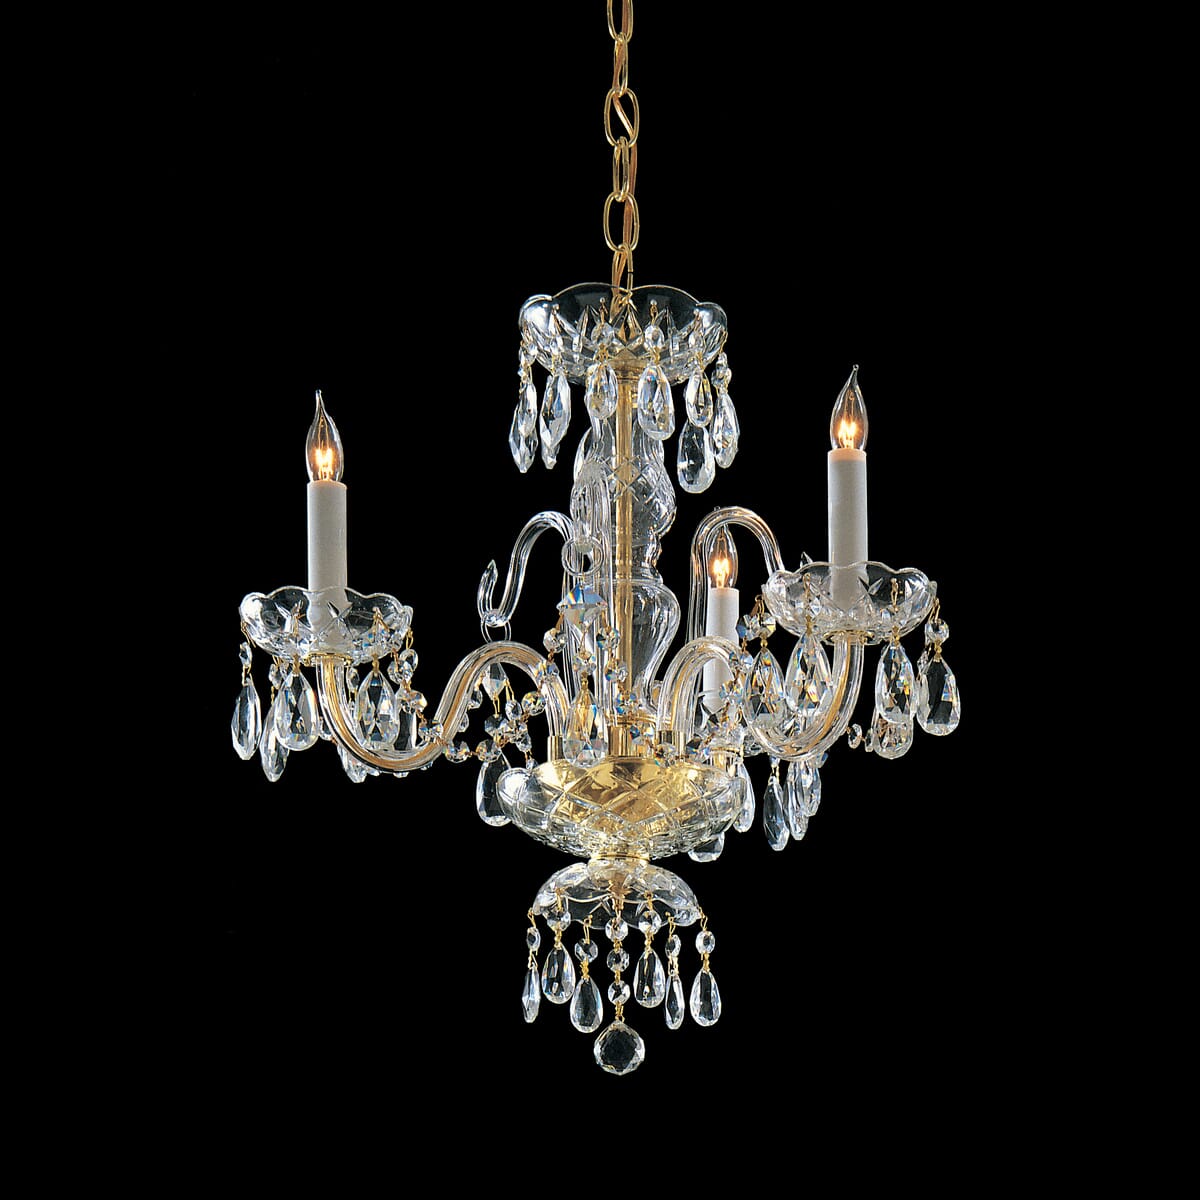 Traditional Crystal 3-Light 18"" Mini Chandelier in Polished Brass with Clear Swarovski Strass Crystals -  Crystorama, 5044-PB-CL-S